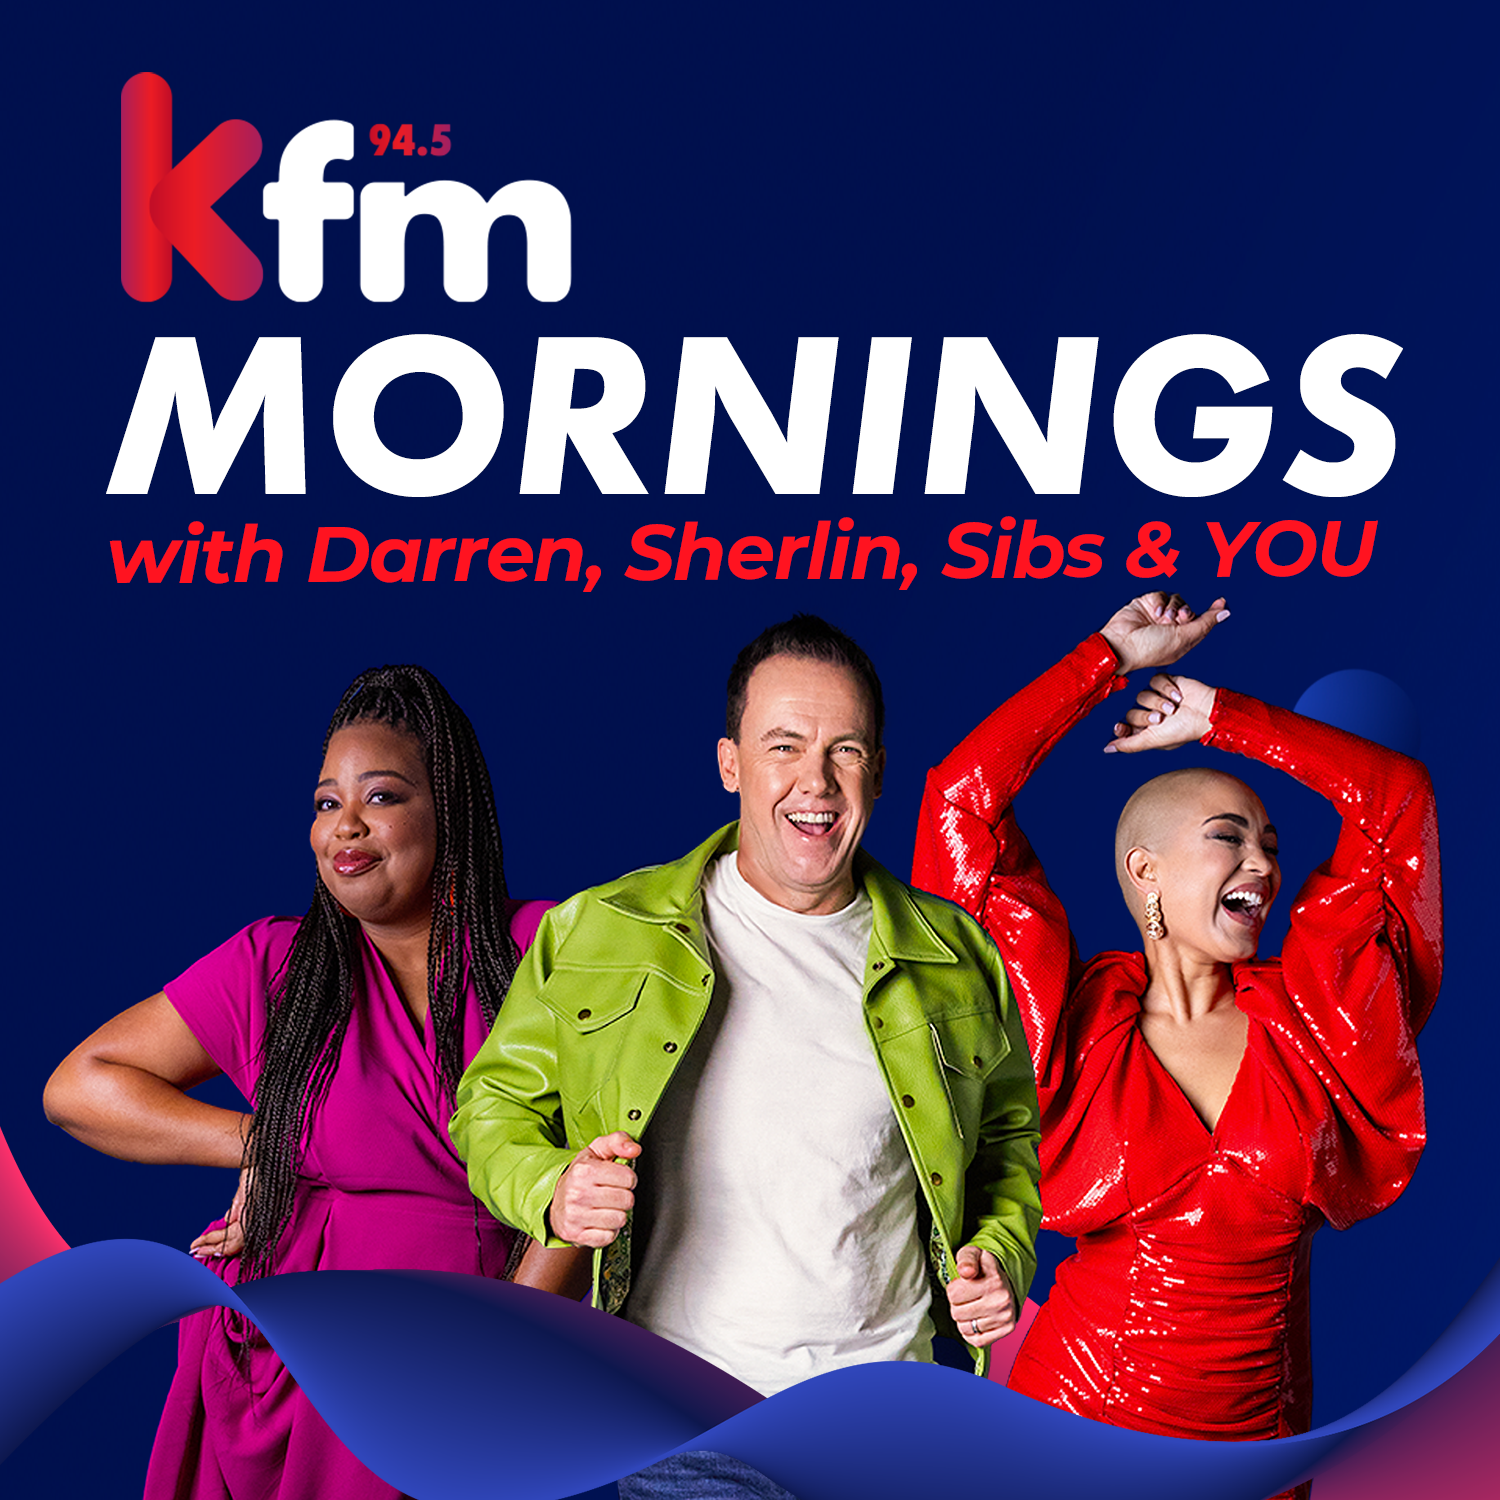 Kfm Mornings FULL SHOW: How do you make friends as an adult?